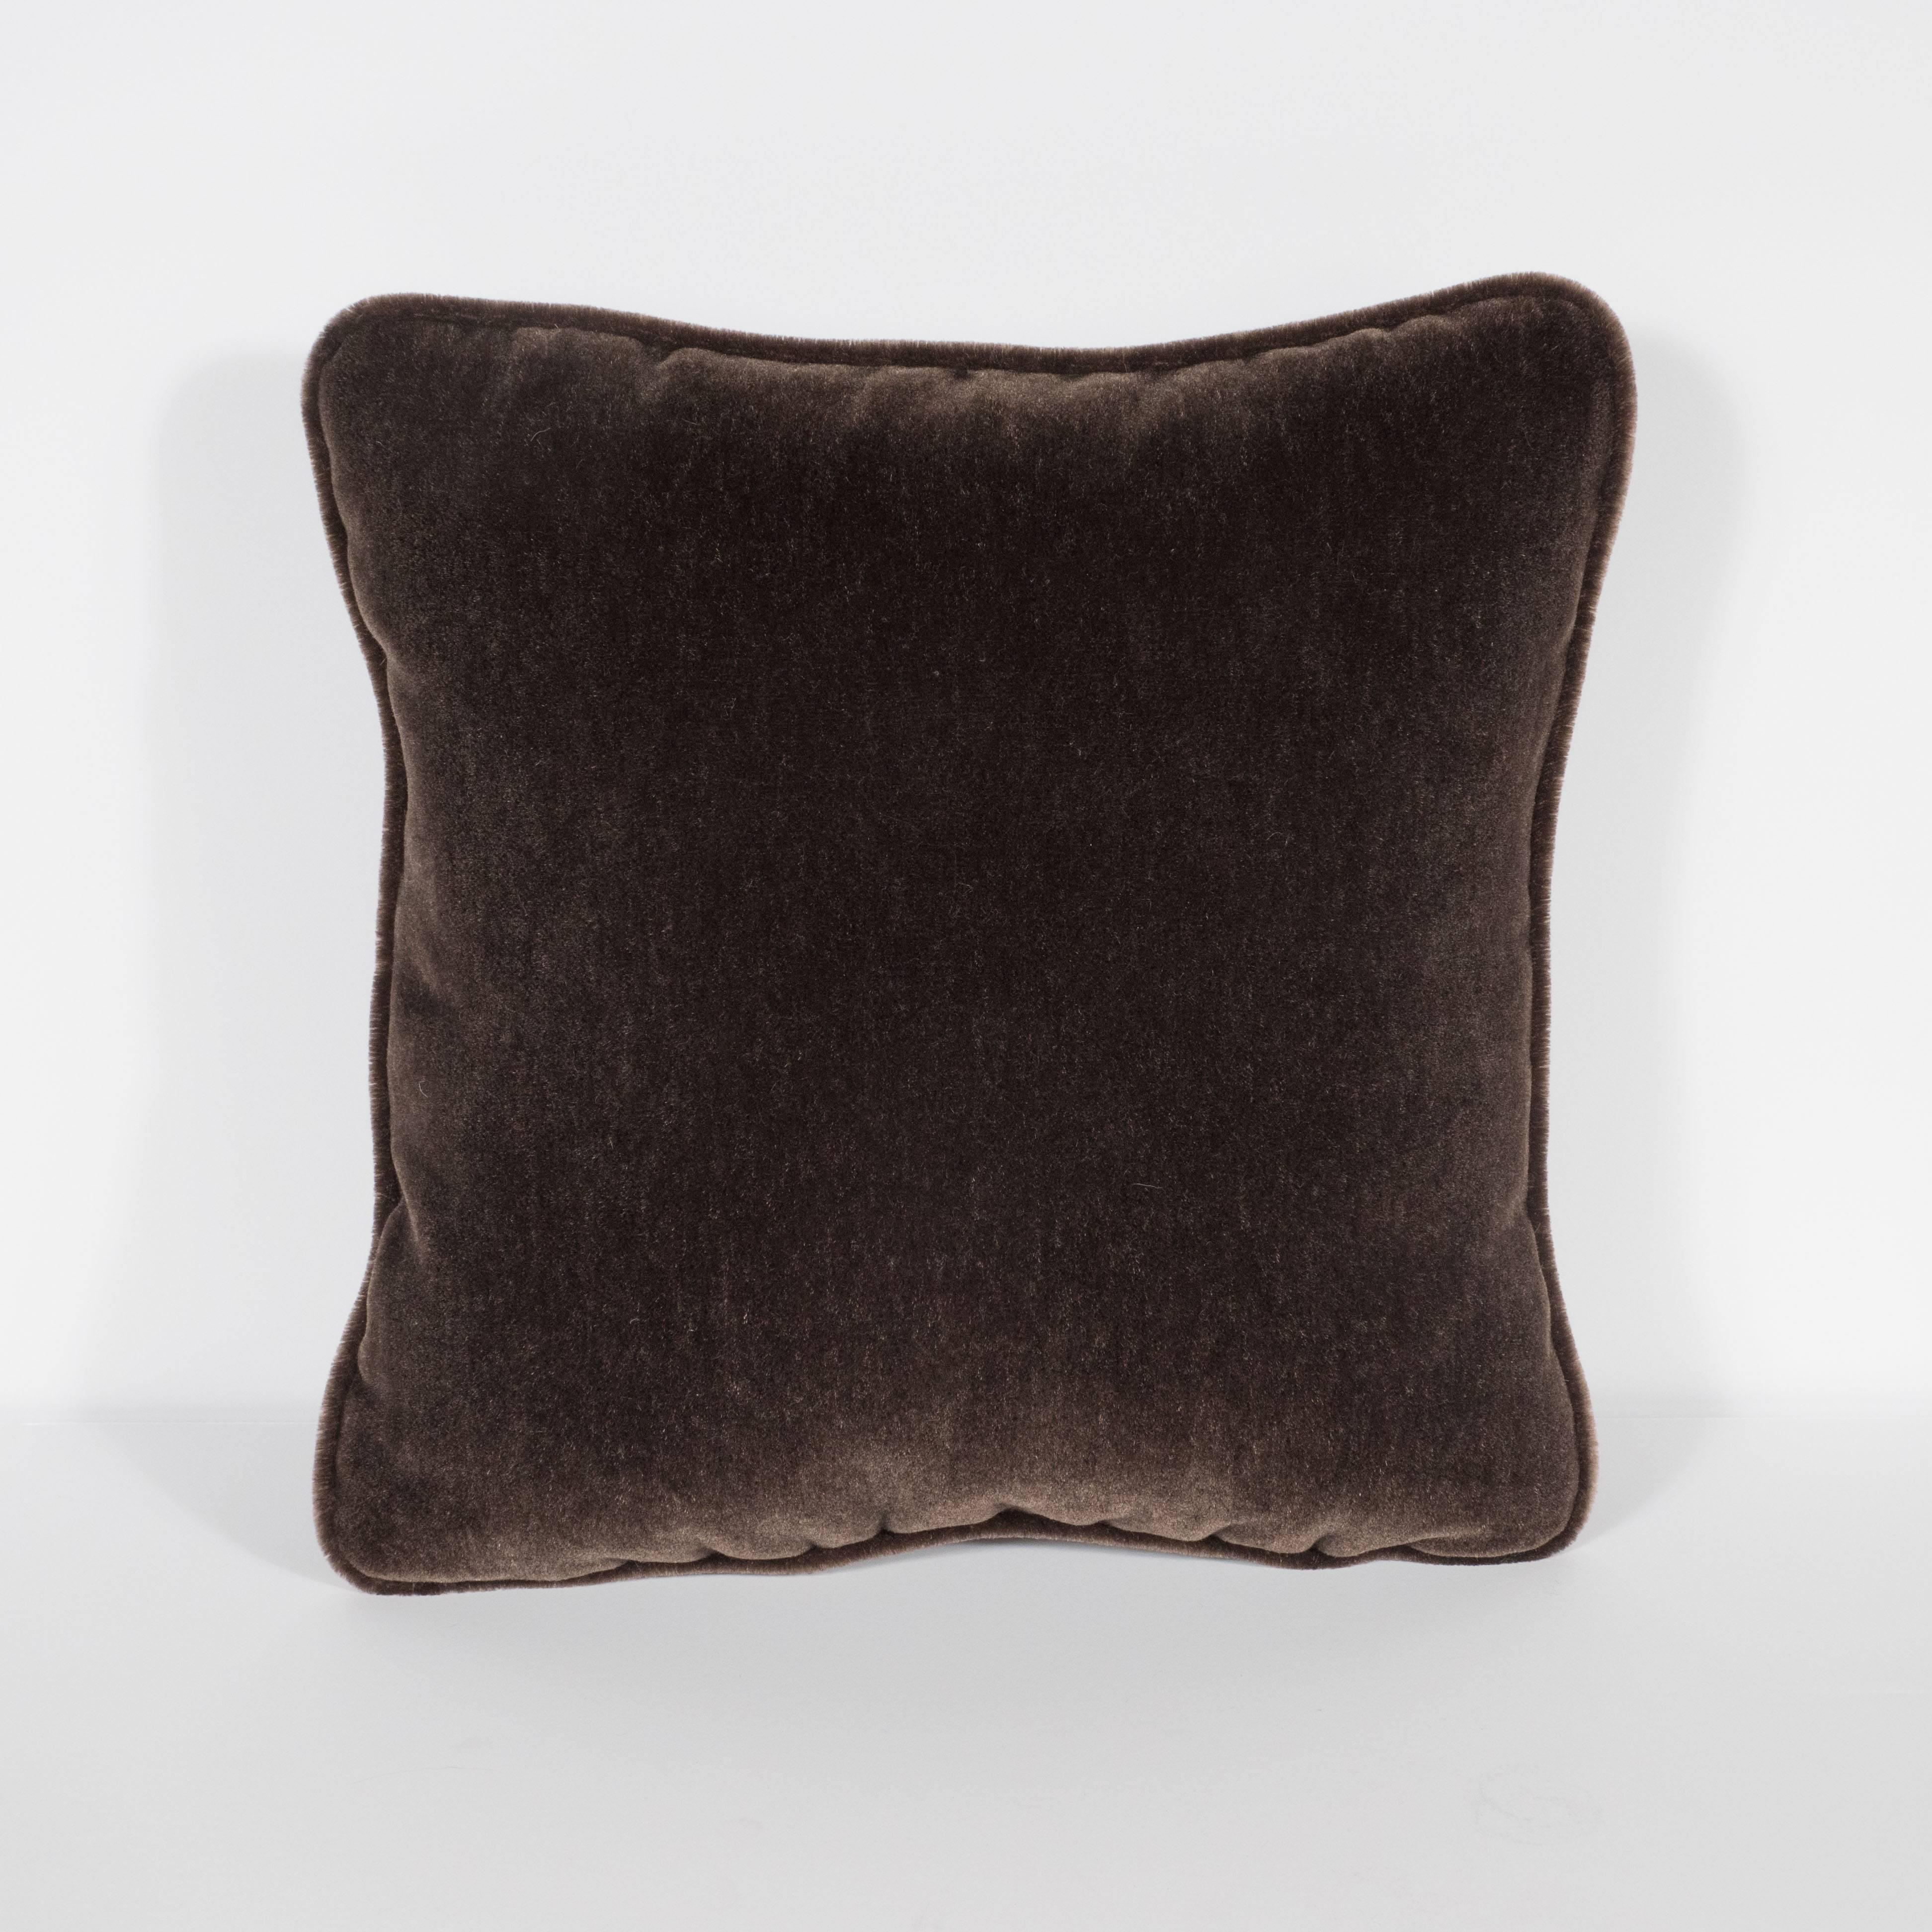 American Gorgeous Pair of Square Custom Handmade Pillows in Chestnut Mohair with Piping